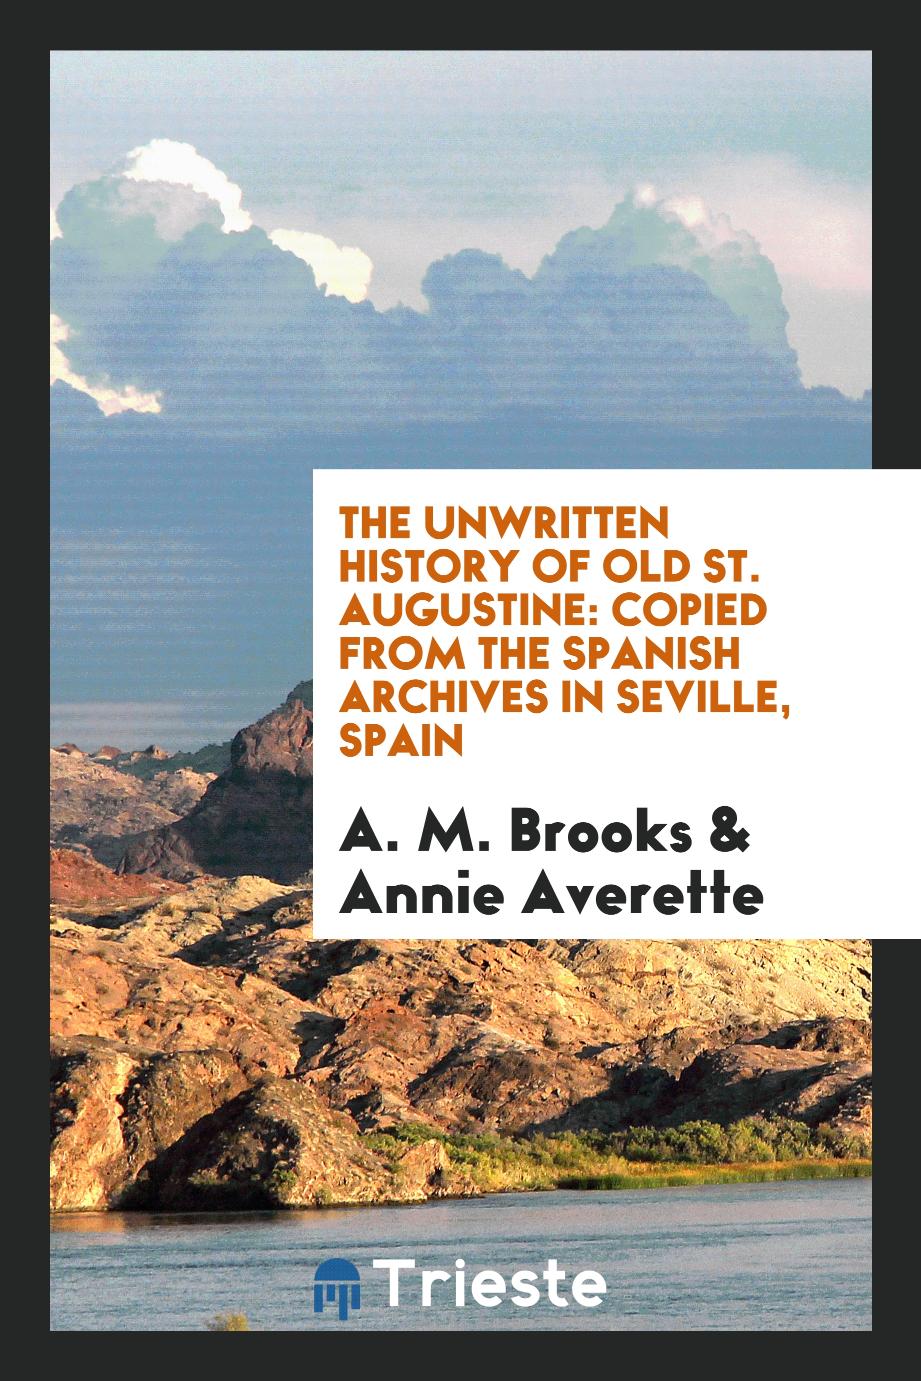 The unwritten history of old St. Augustine: copied from the Spanish archives in Seville, Spain